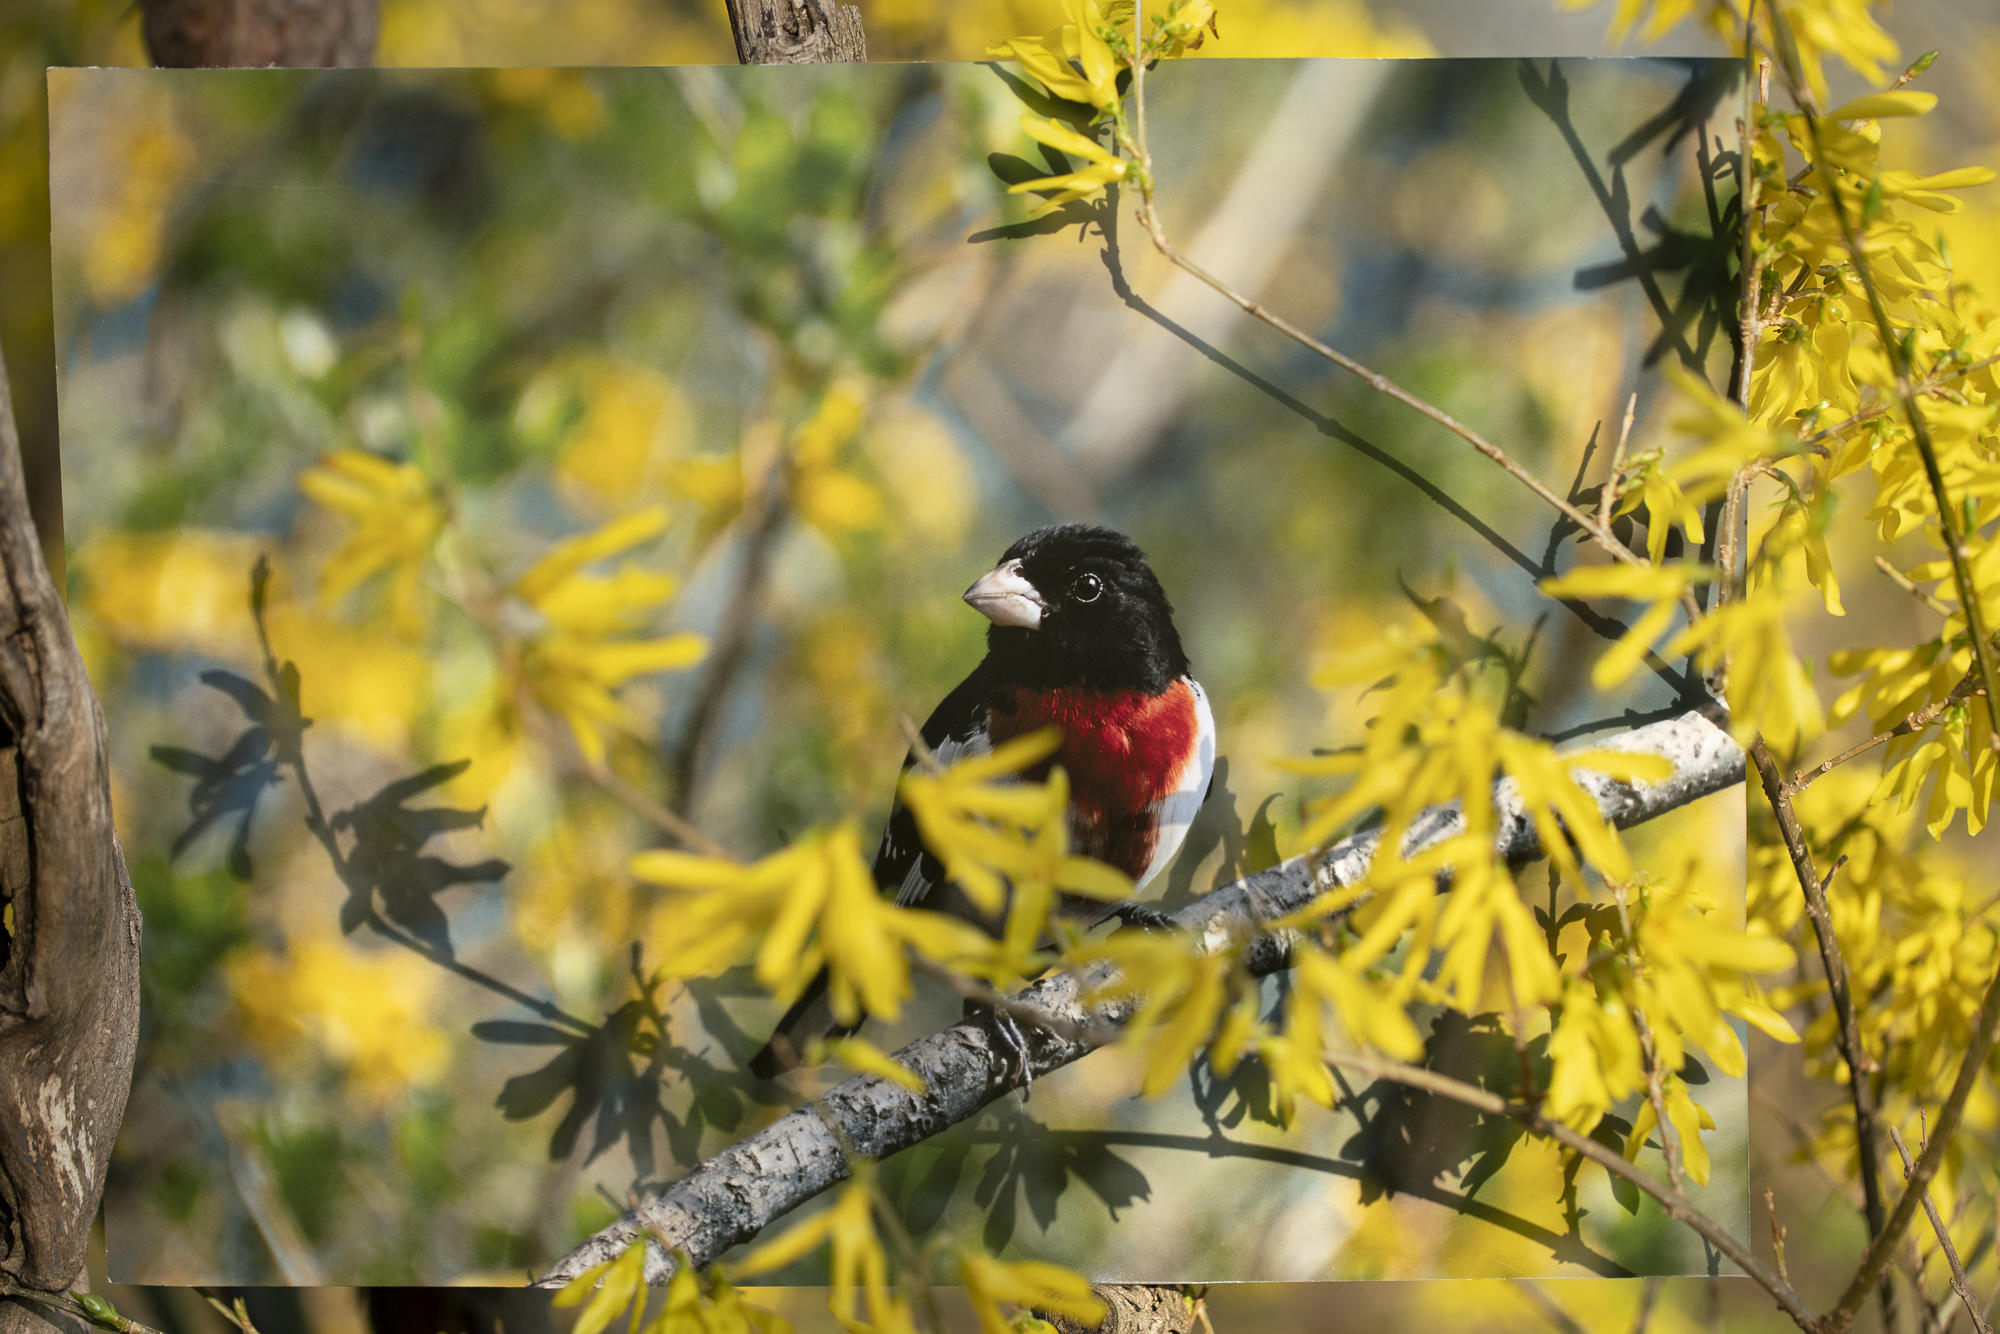 A photograph of a printed photograph of a Rose-breasted Grosbeak placed in a Forsythia bush with lots of yellow flowers.